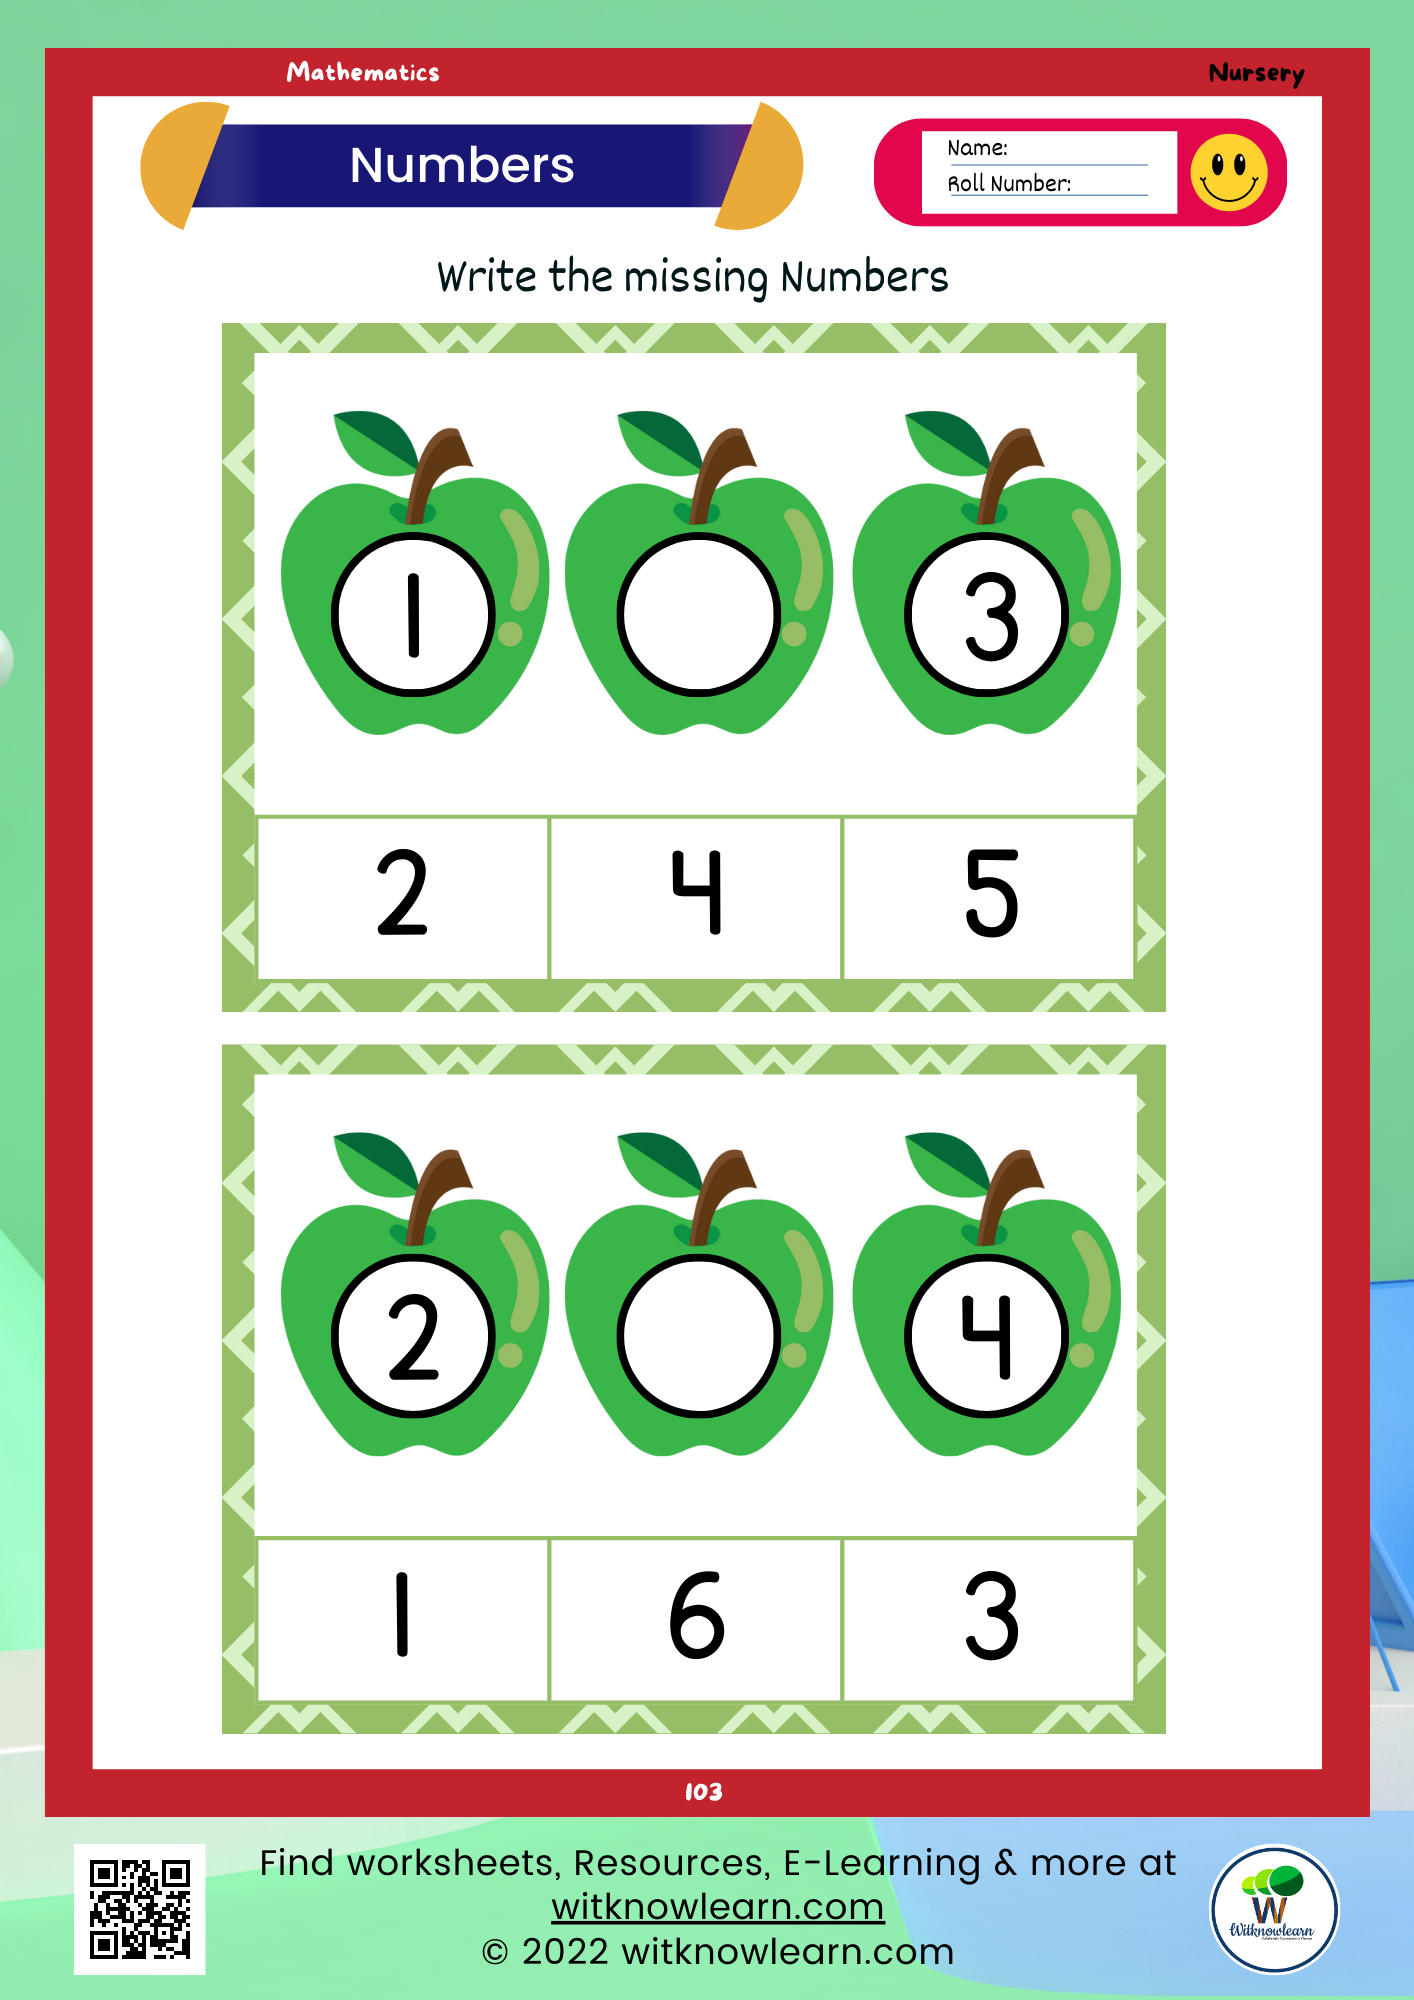 5 Easy Math Worksheets for Nursery on Missing Numbers